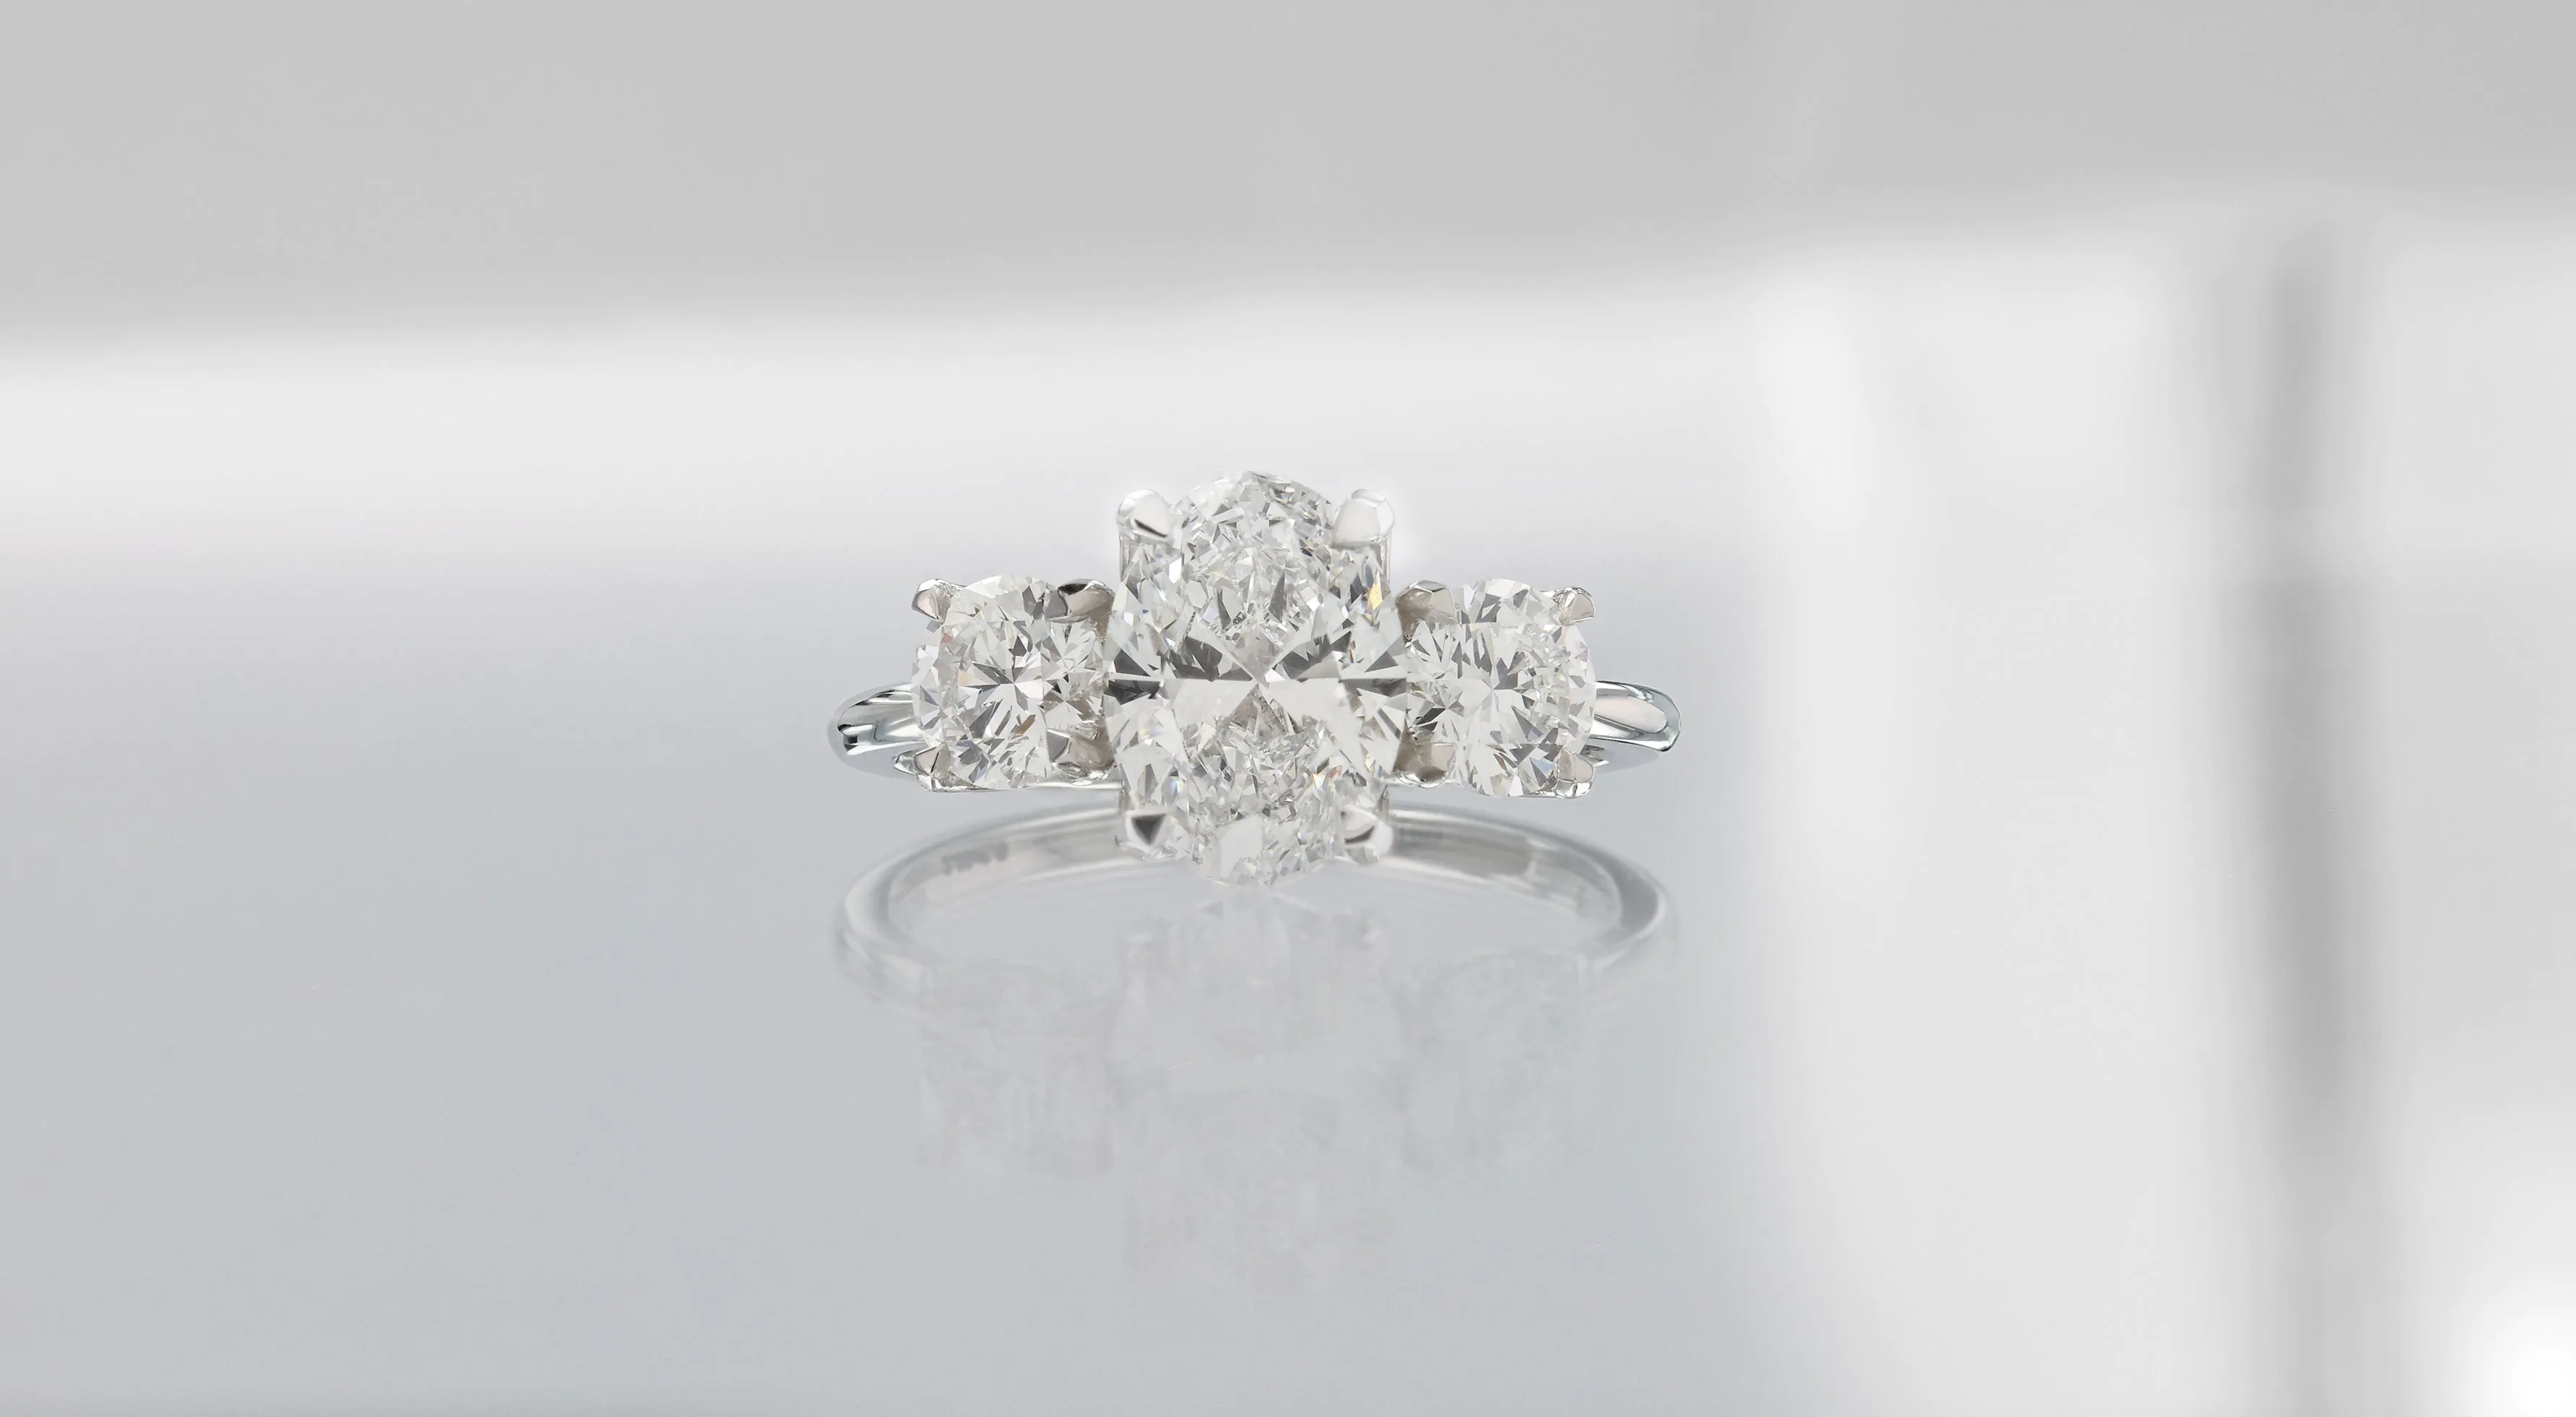 Lab-Grown at Laings – A Guide to Our Laboratory-Grown Diamonds